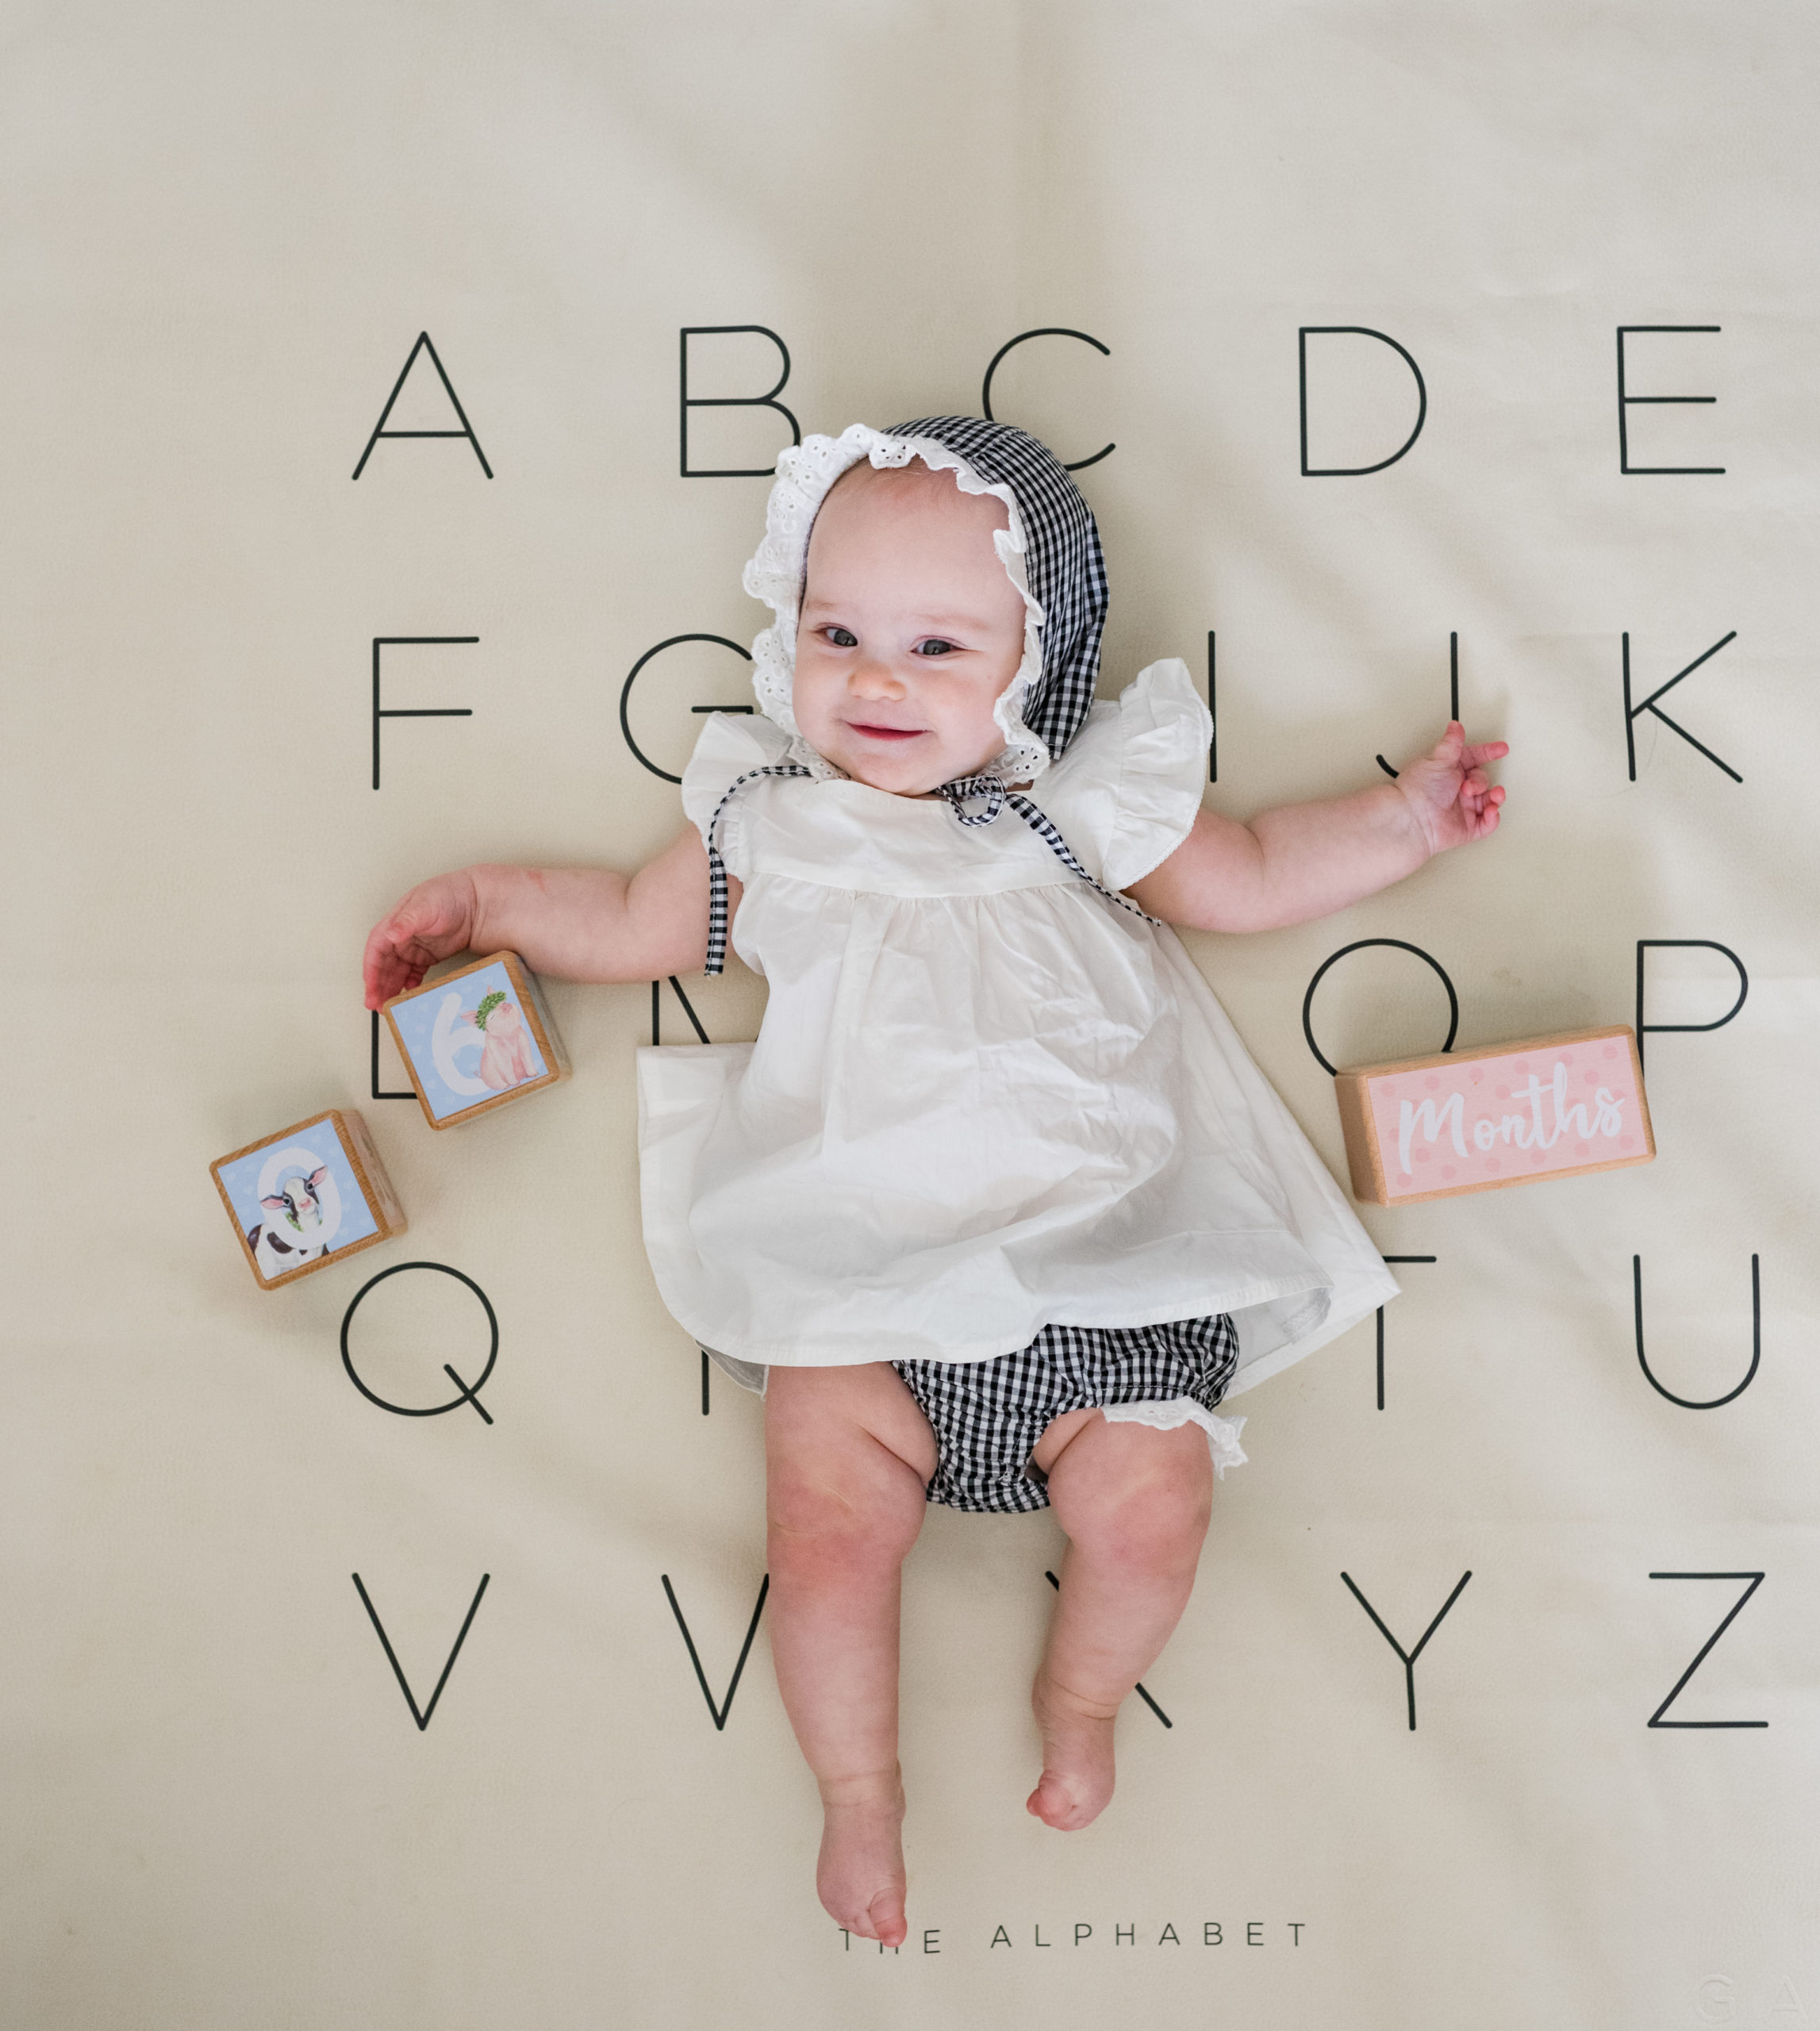 Olivia 6 Months Old - Sweet Williams Photography is a lifestyle, engagement, and wedding photographer serving the Nashville, Tennessee area, and destination locations.